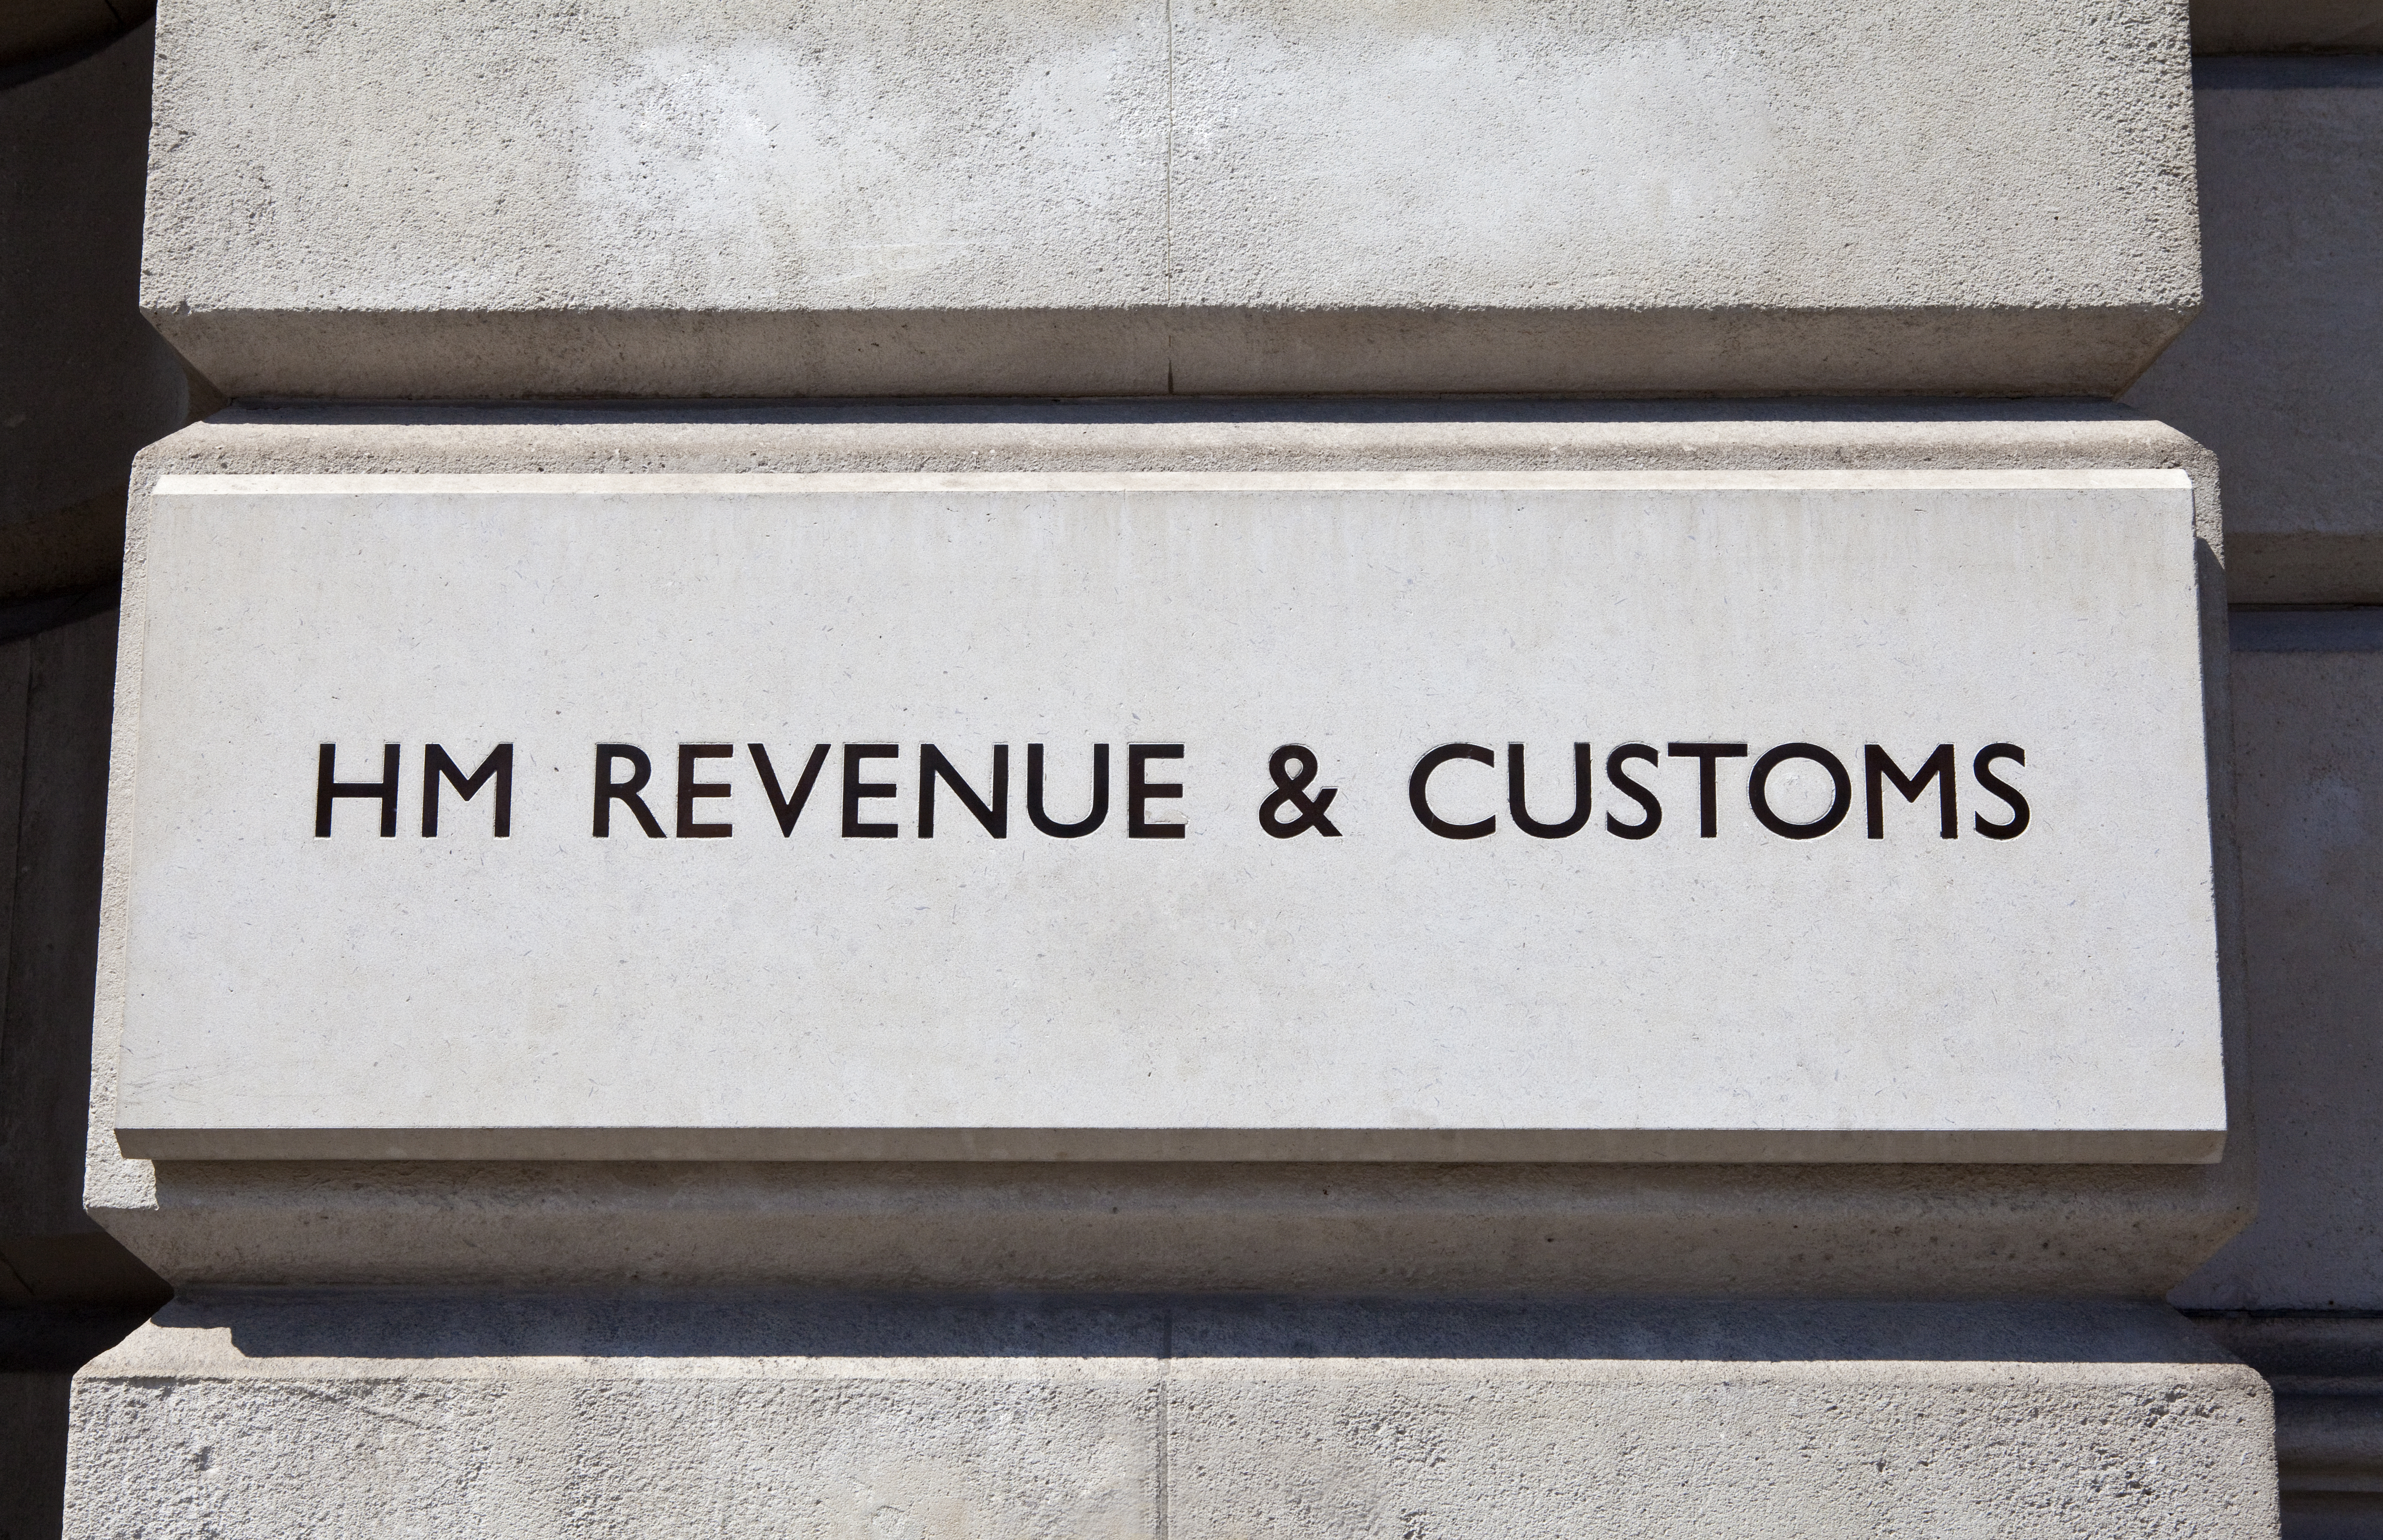 HMRC: Total stamp duty receipts continue to decline